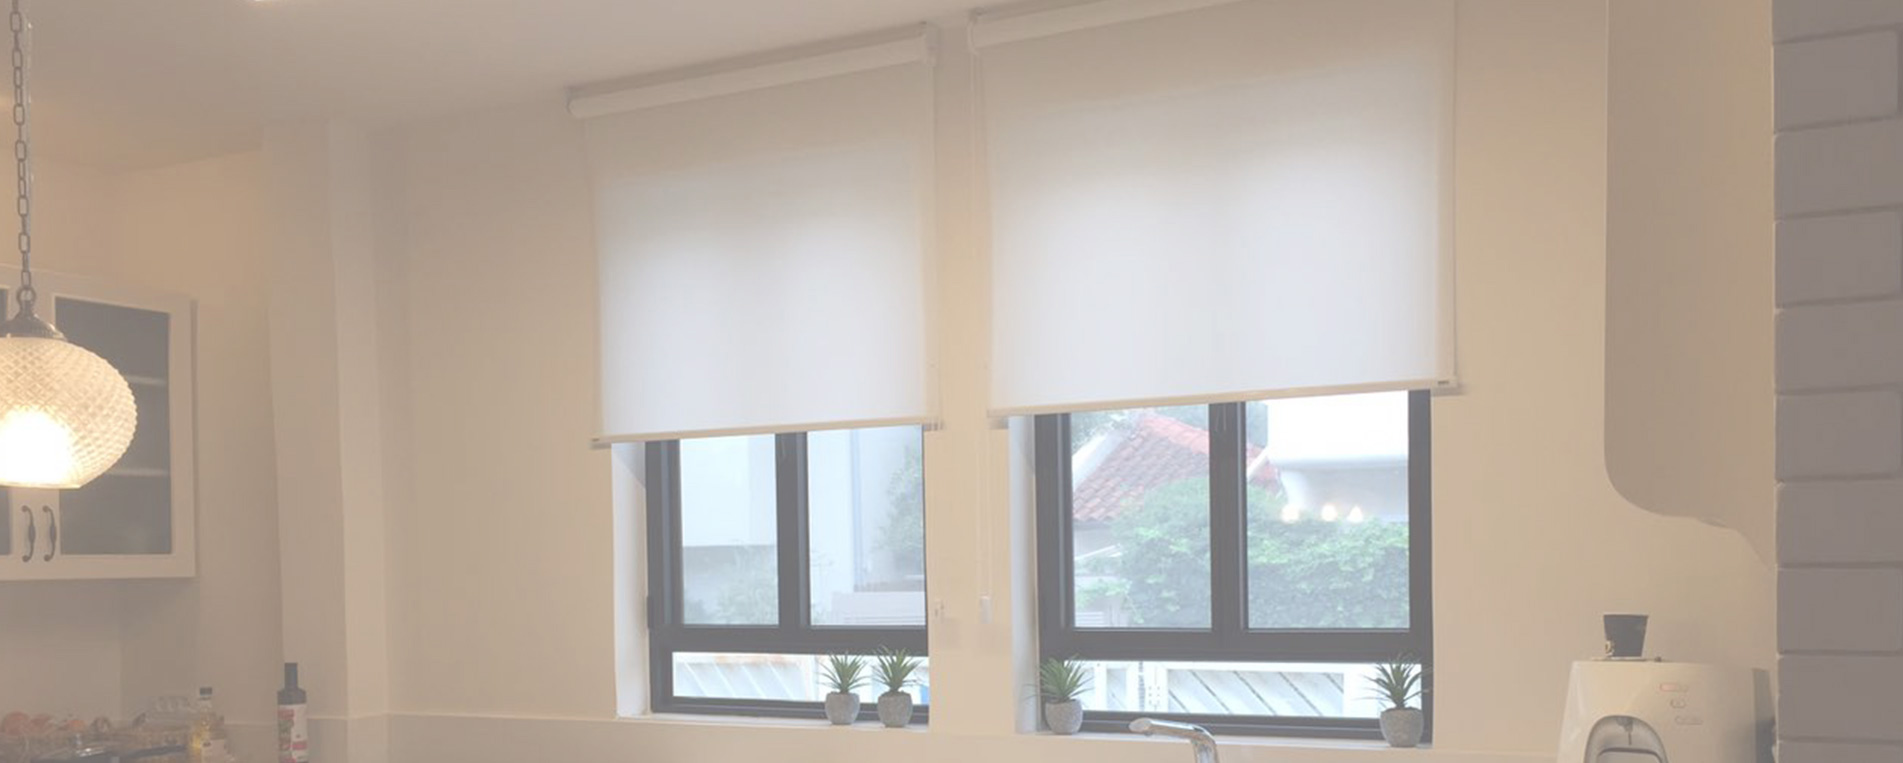 Blinds and Window Shades Great For Privacy